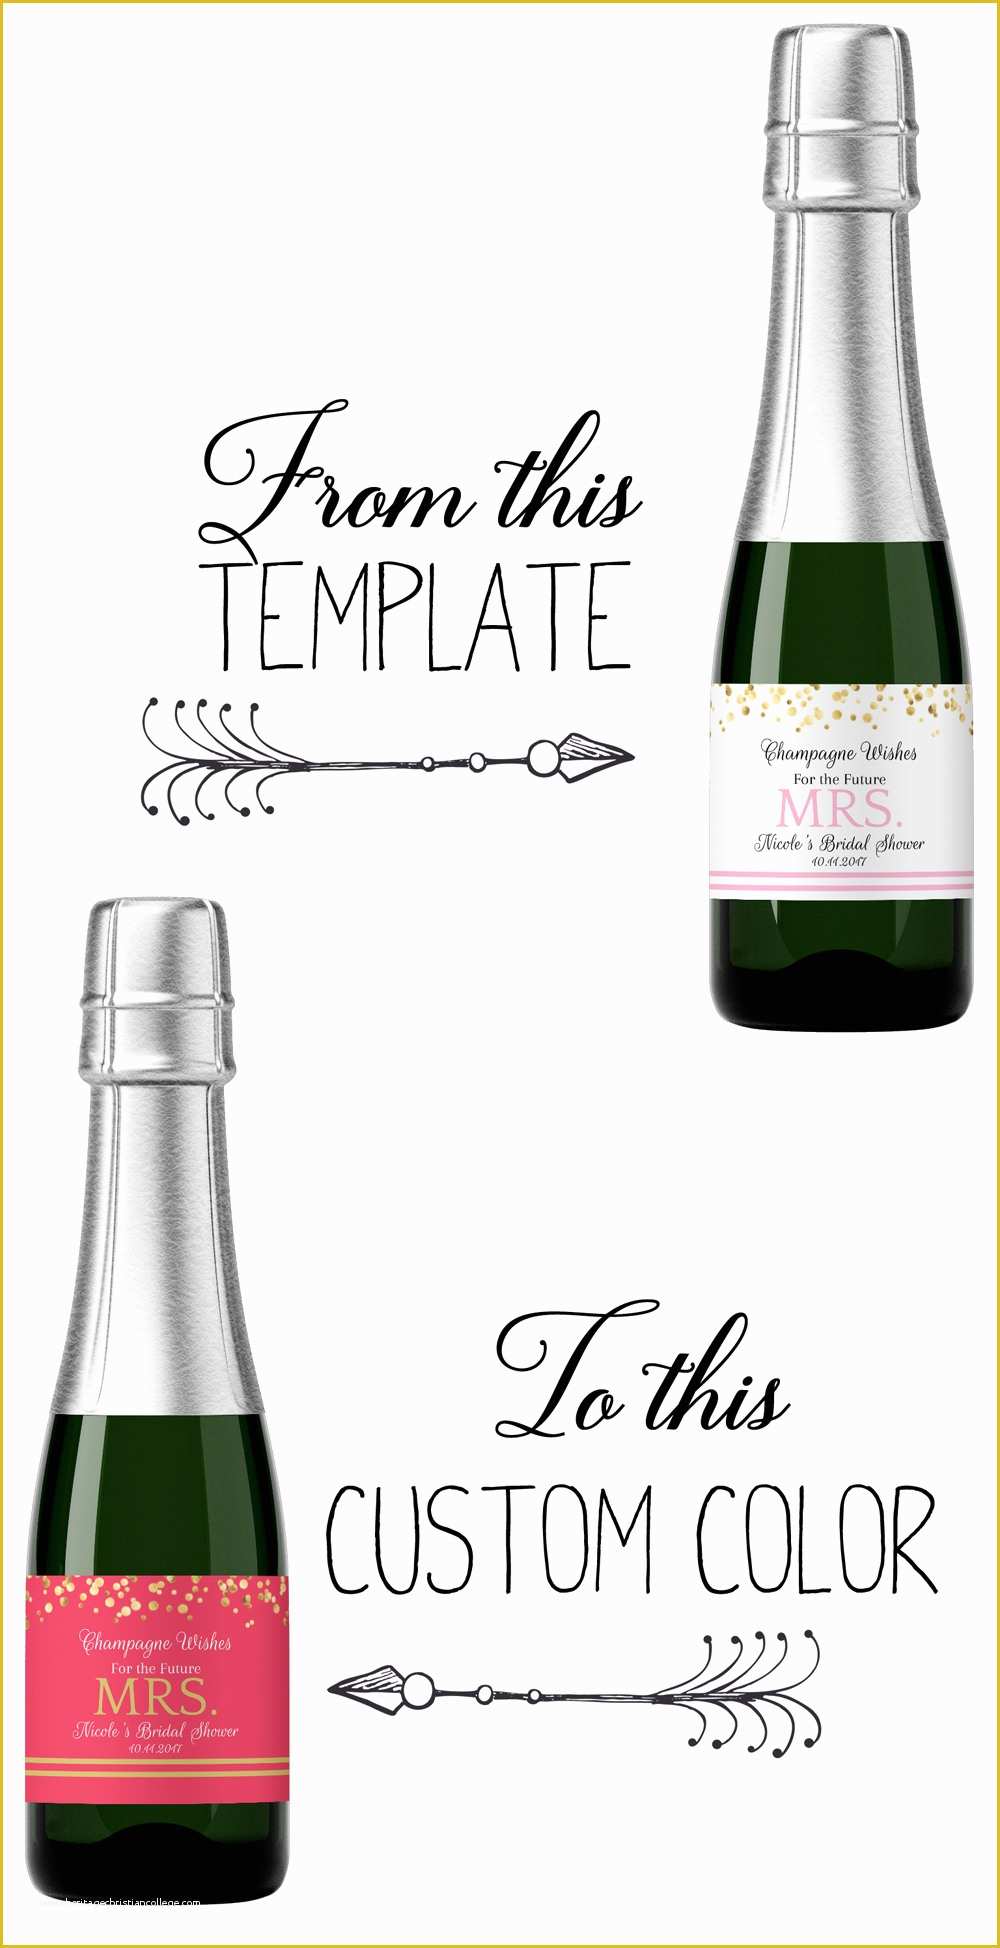 Liquor Bottle Label Templates Free Of How to Make A Custom Label From A Template Step by Step